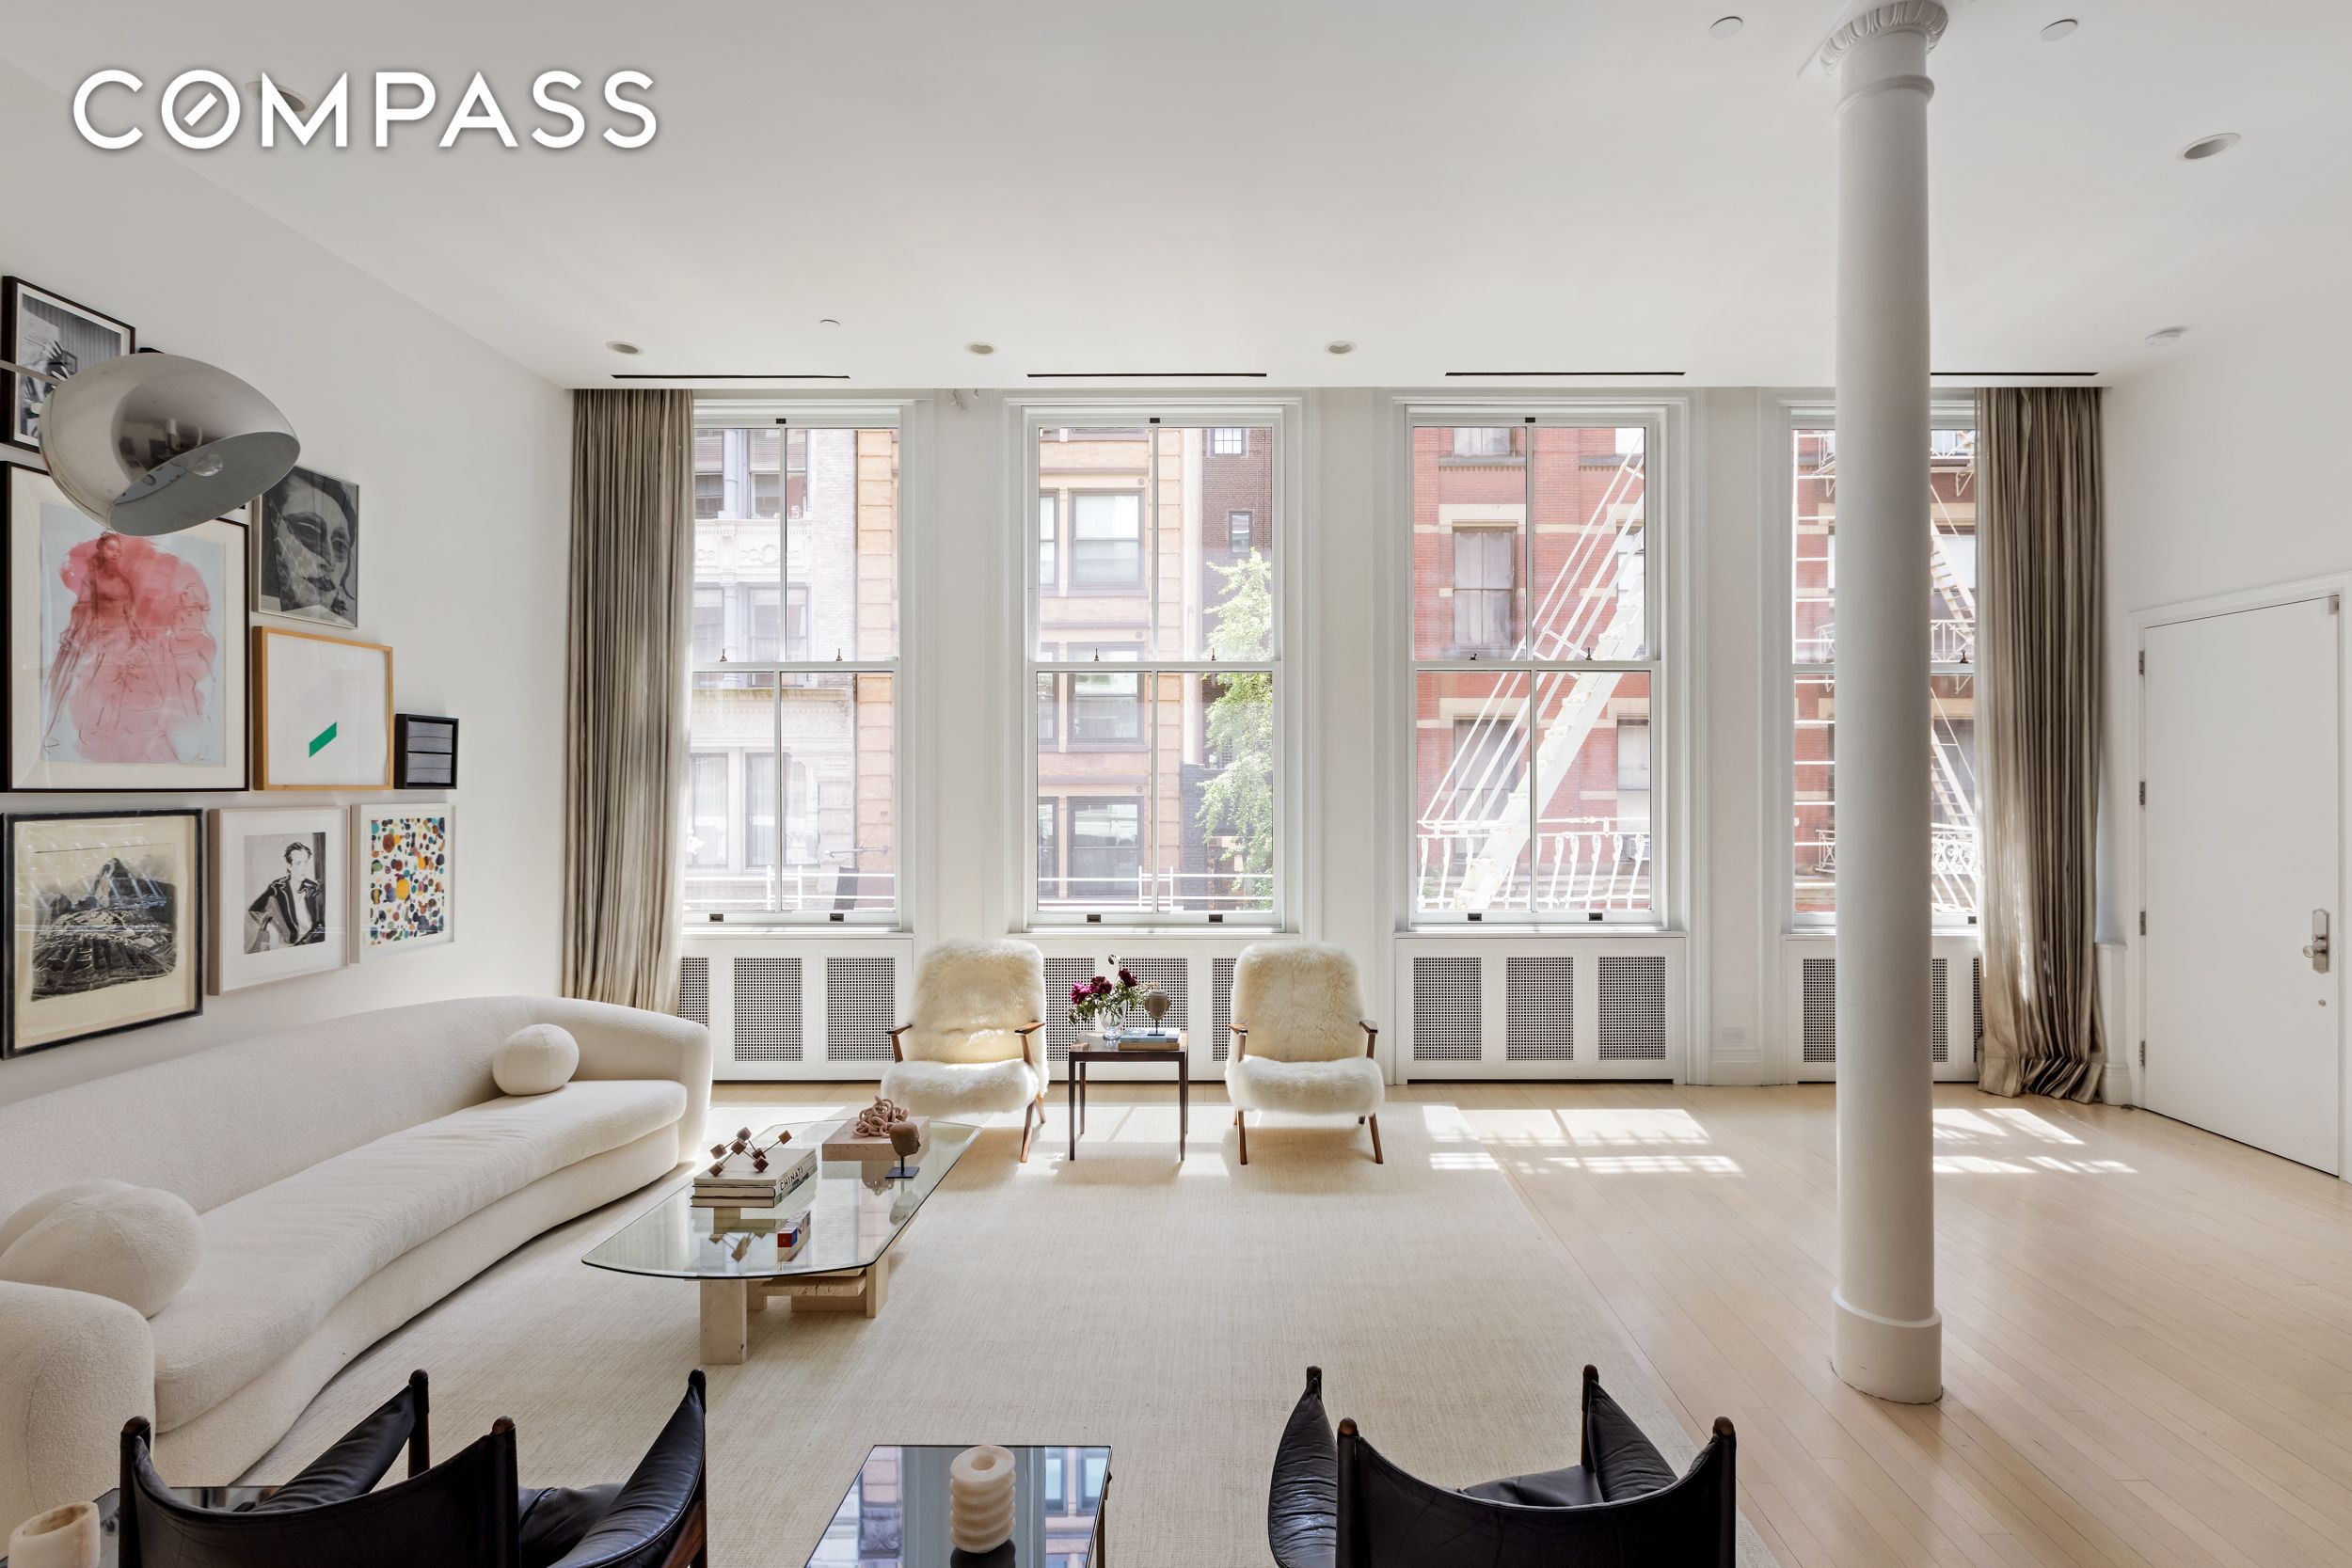 115 Spring Street 2, Soho, Downtown, NYC - 3 Bedrooms  
2.5 Bathrooms  
5 Rooms - 